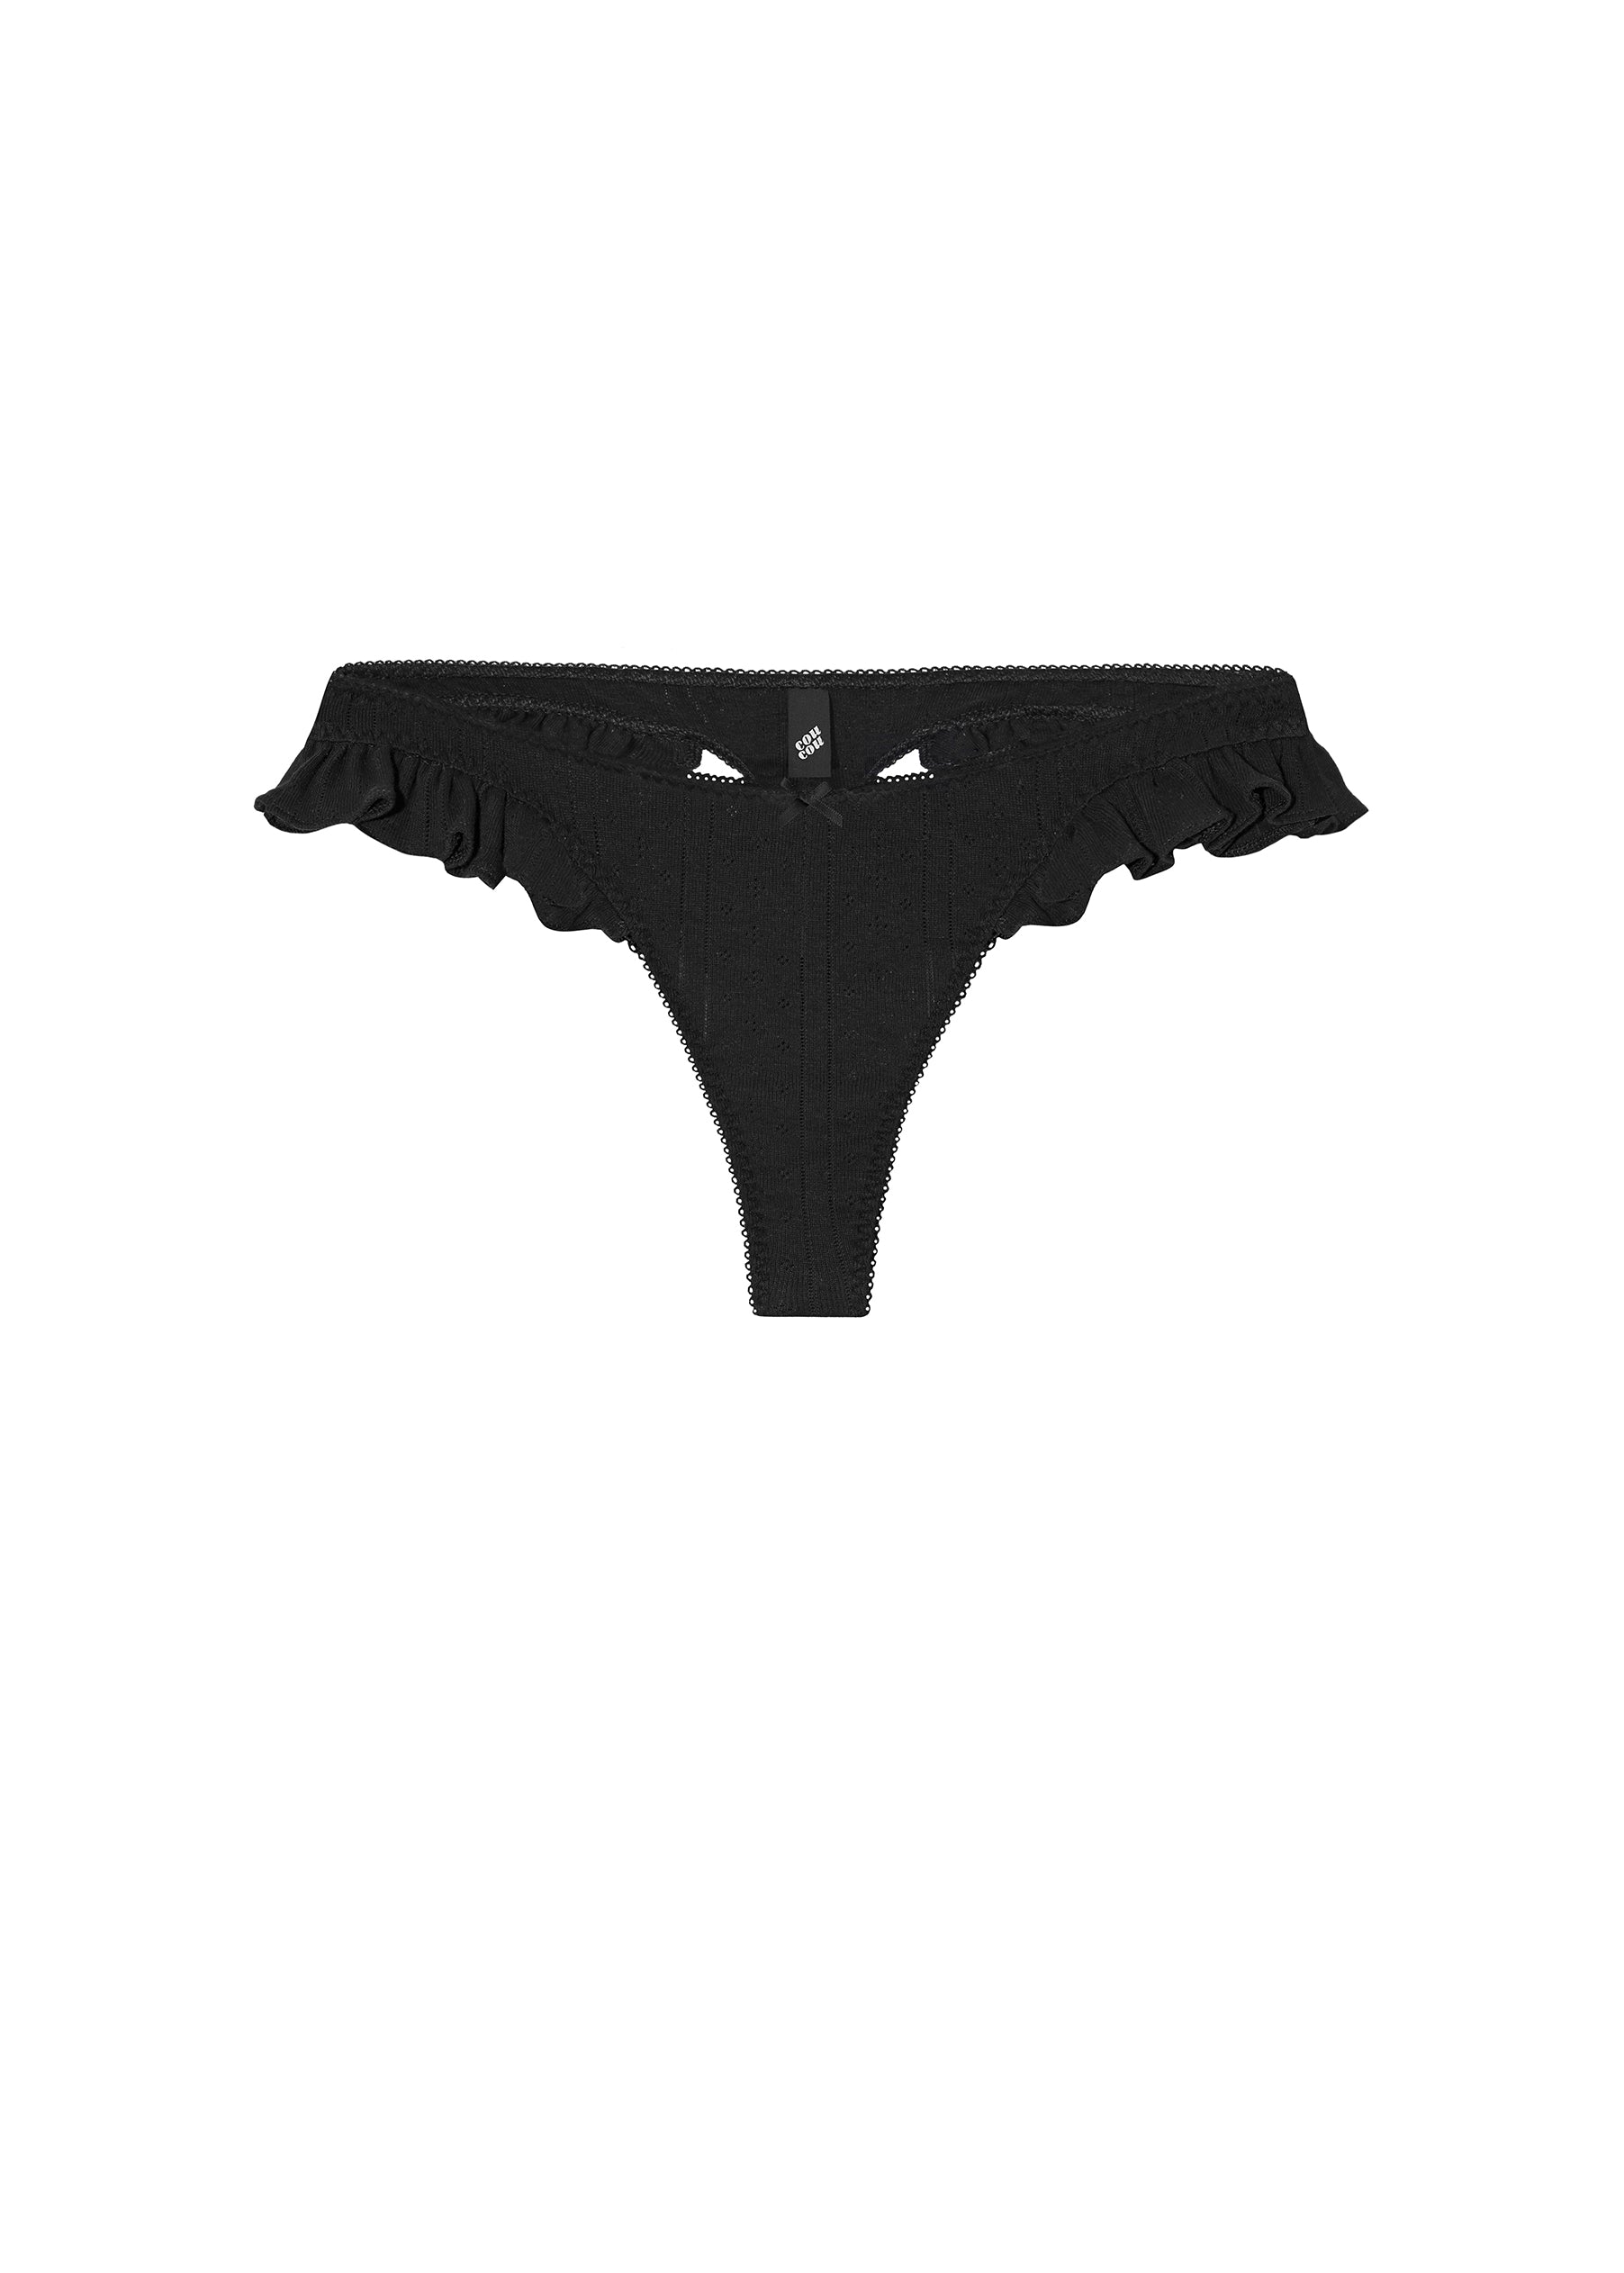 The Butterfly Thong Black